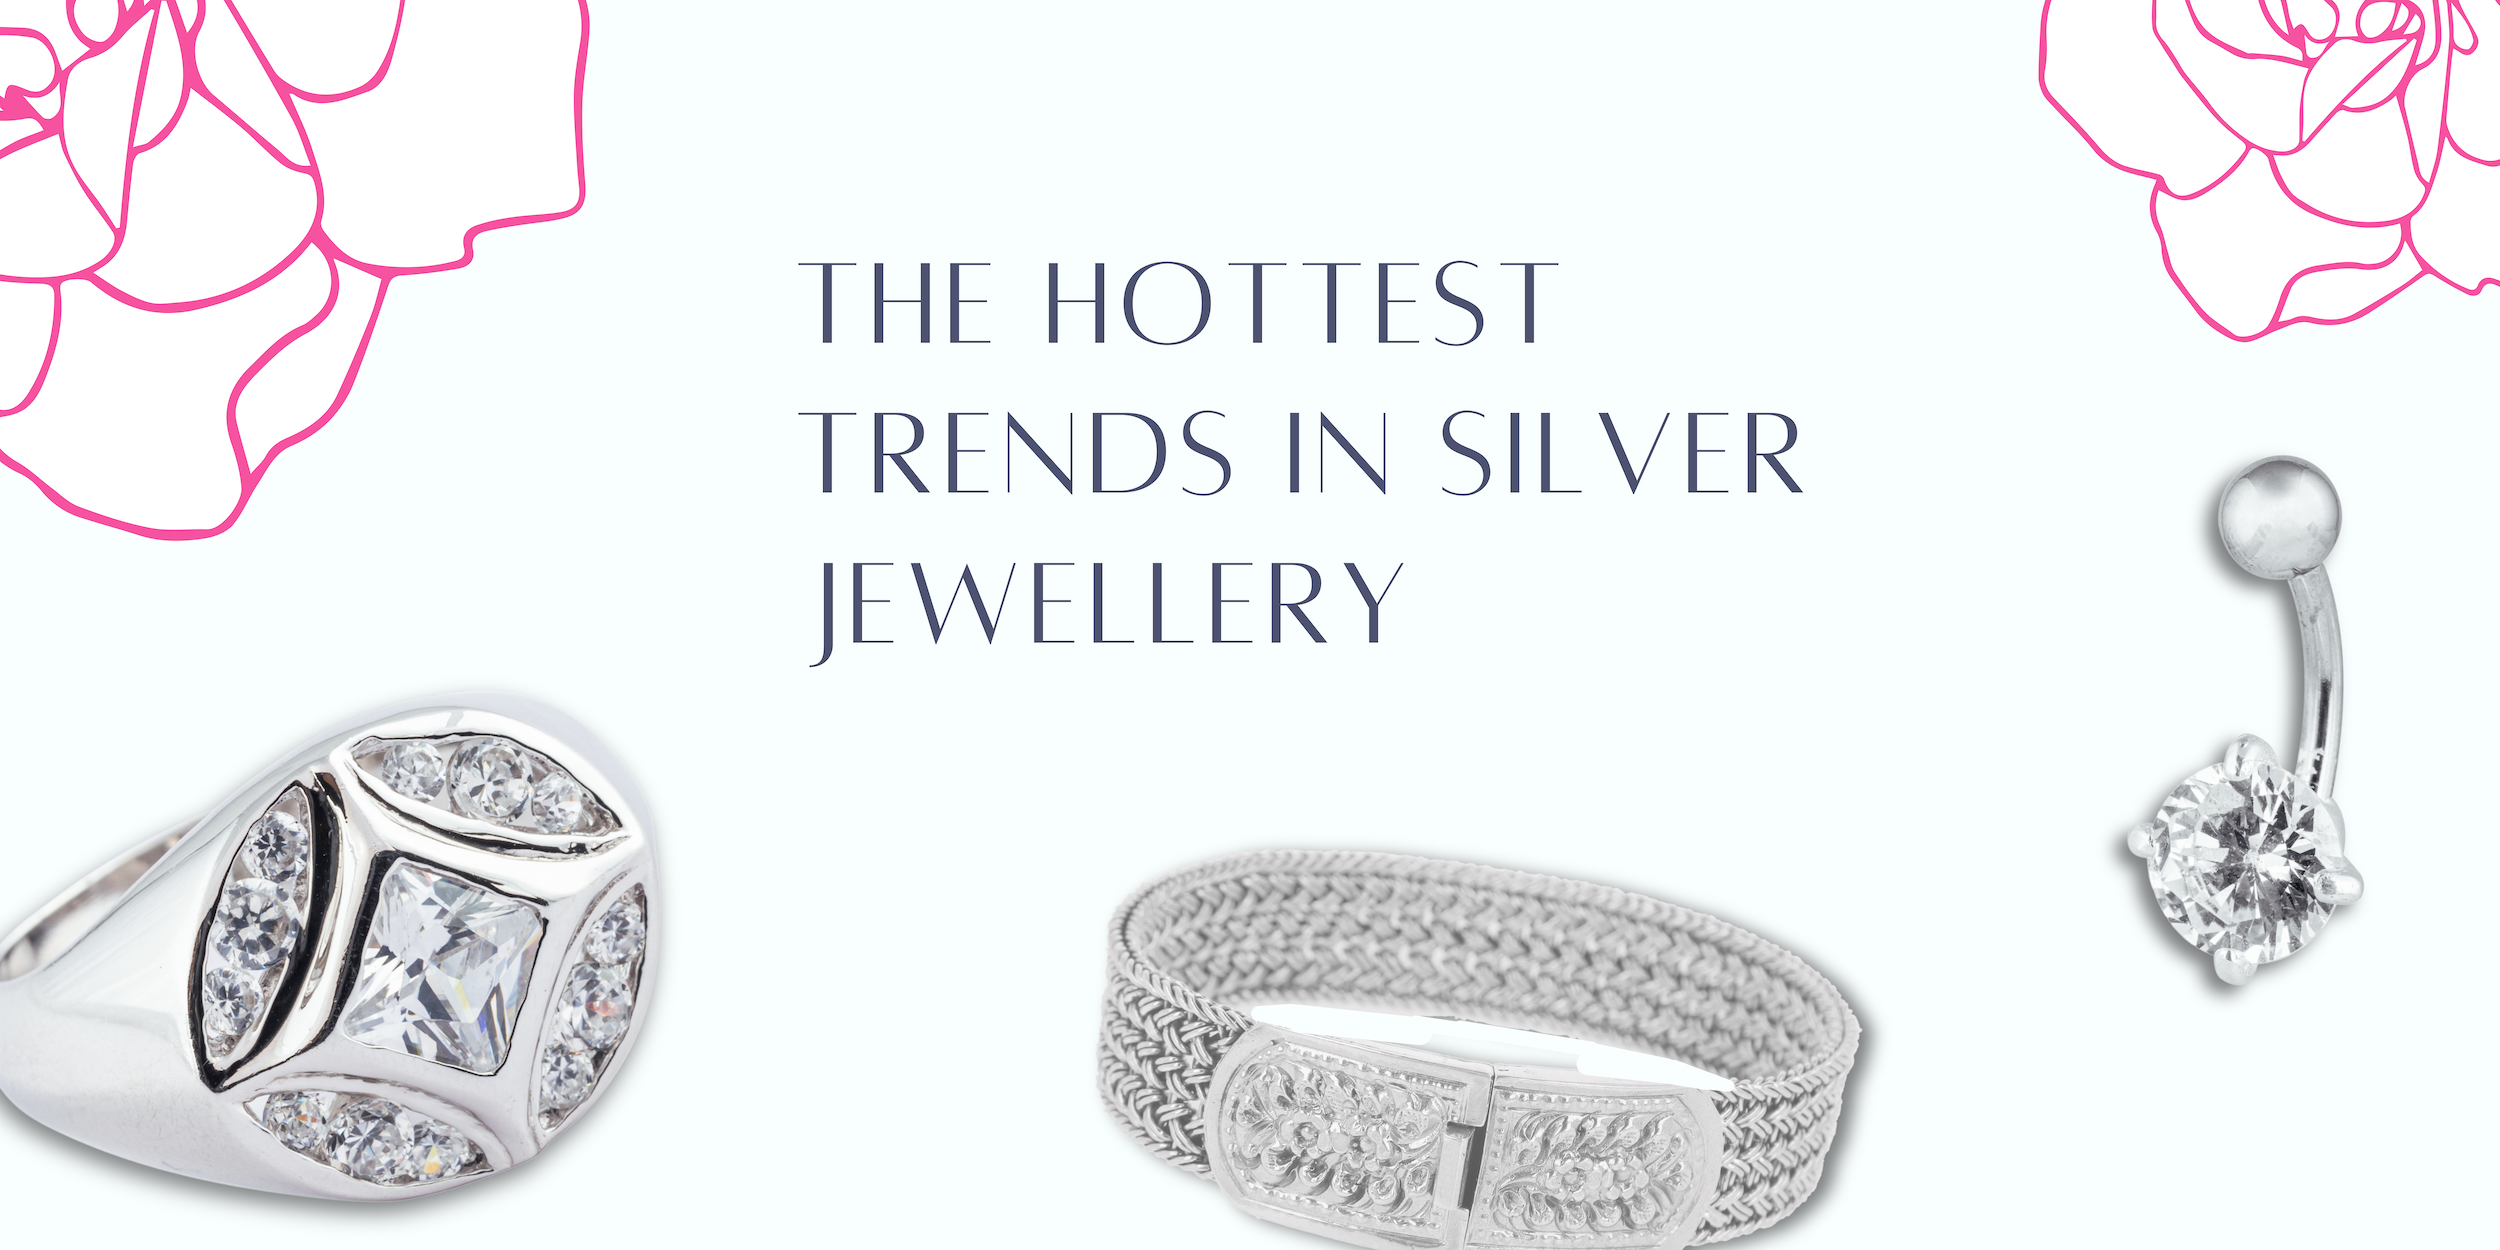 The Hottest Trends in Silver Jewellery.